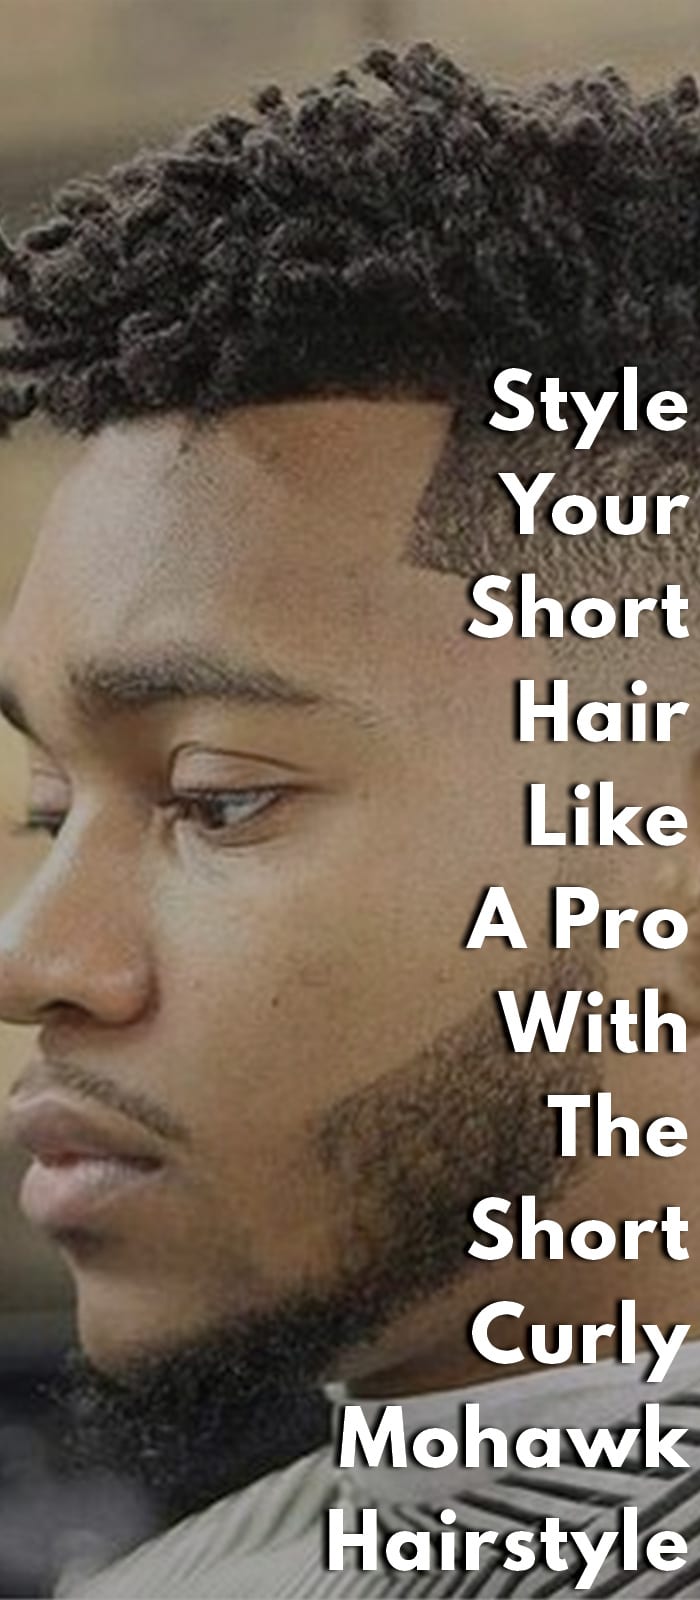 Style Your Short Hair Like The Short Curly Mohawk